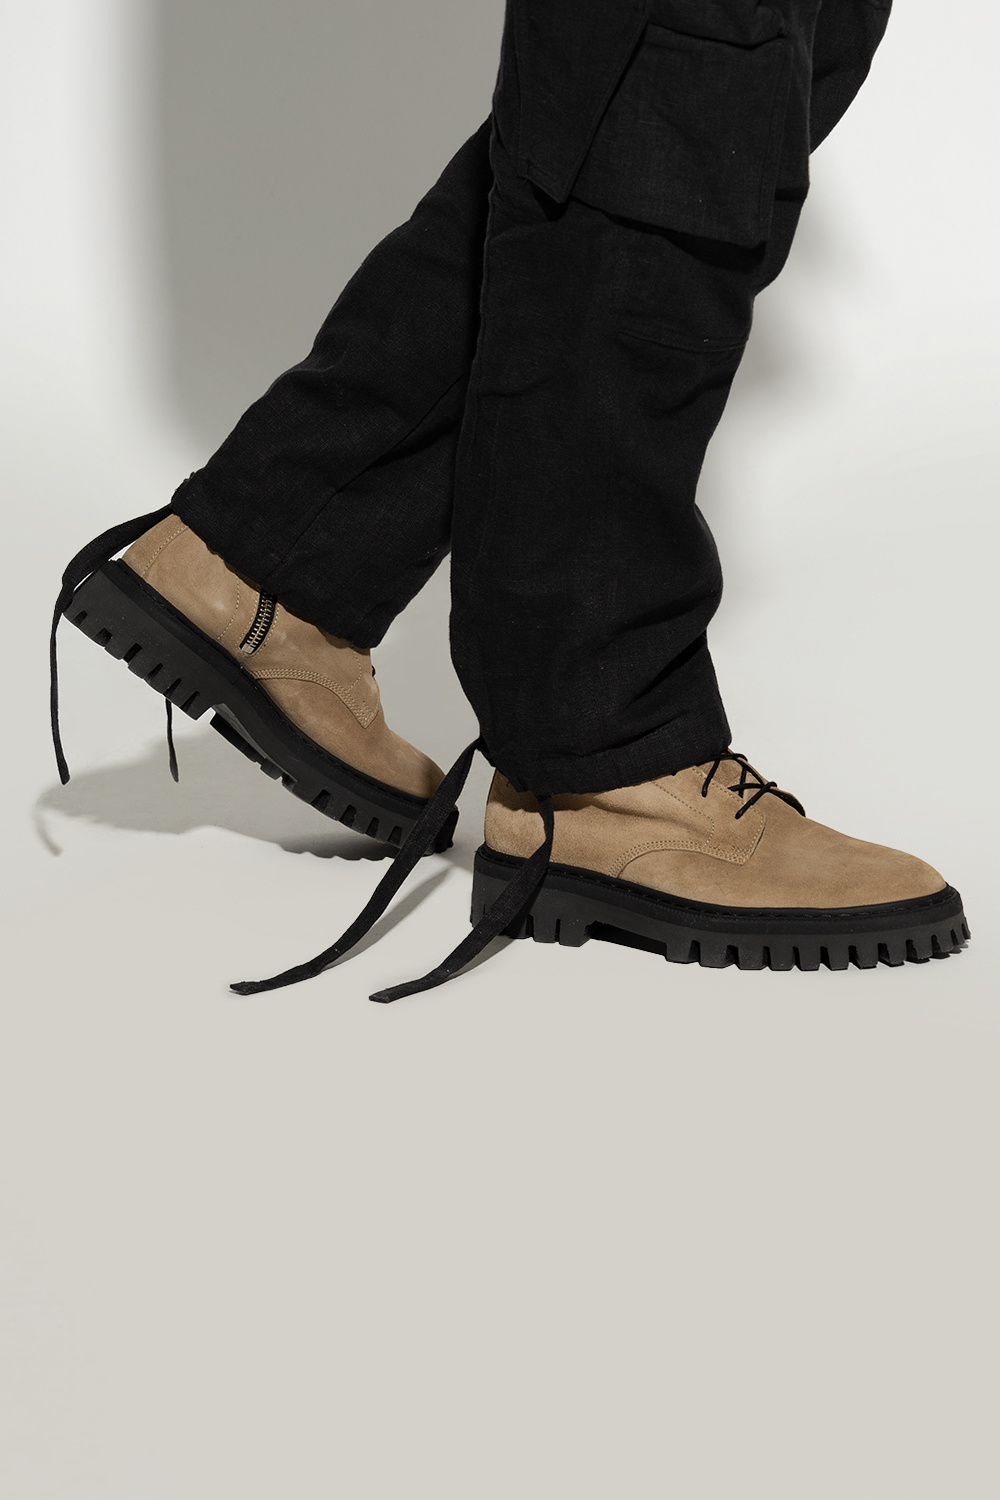 Iro ‘Kosmic’ lace-up ankle boots